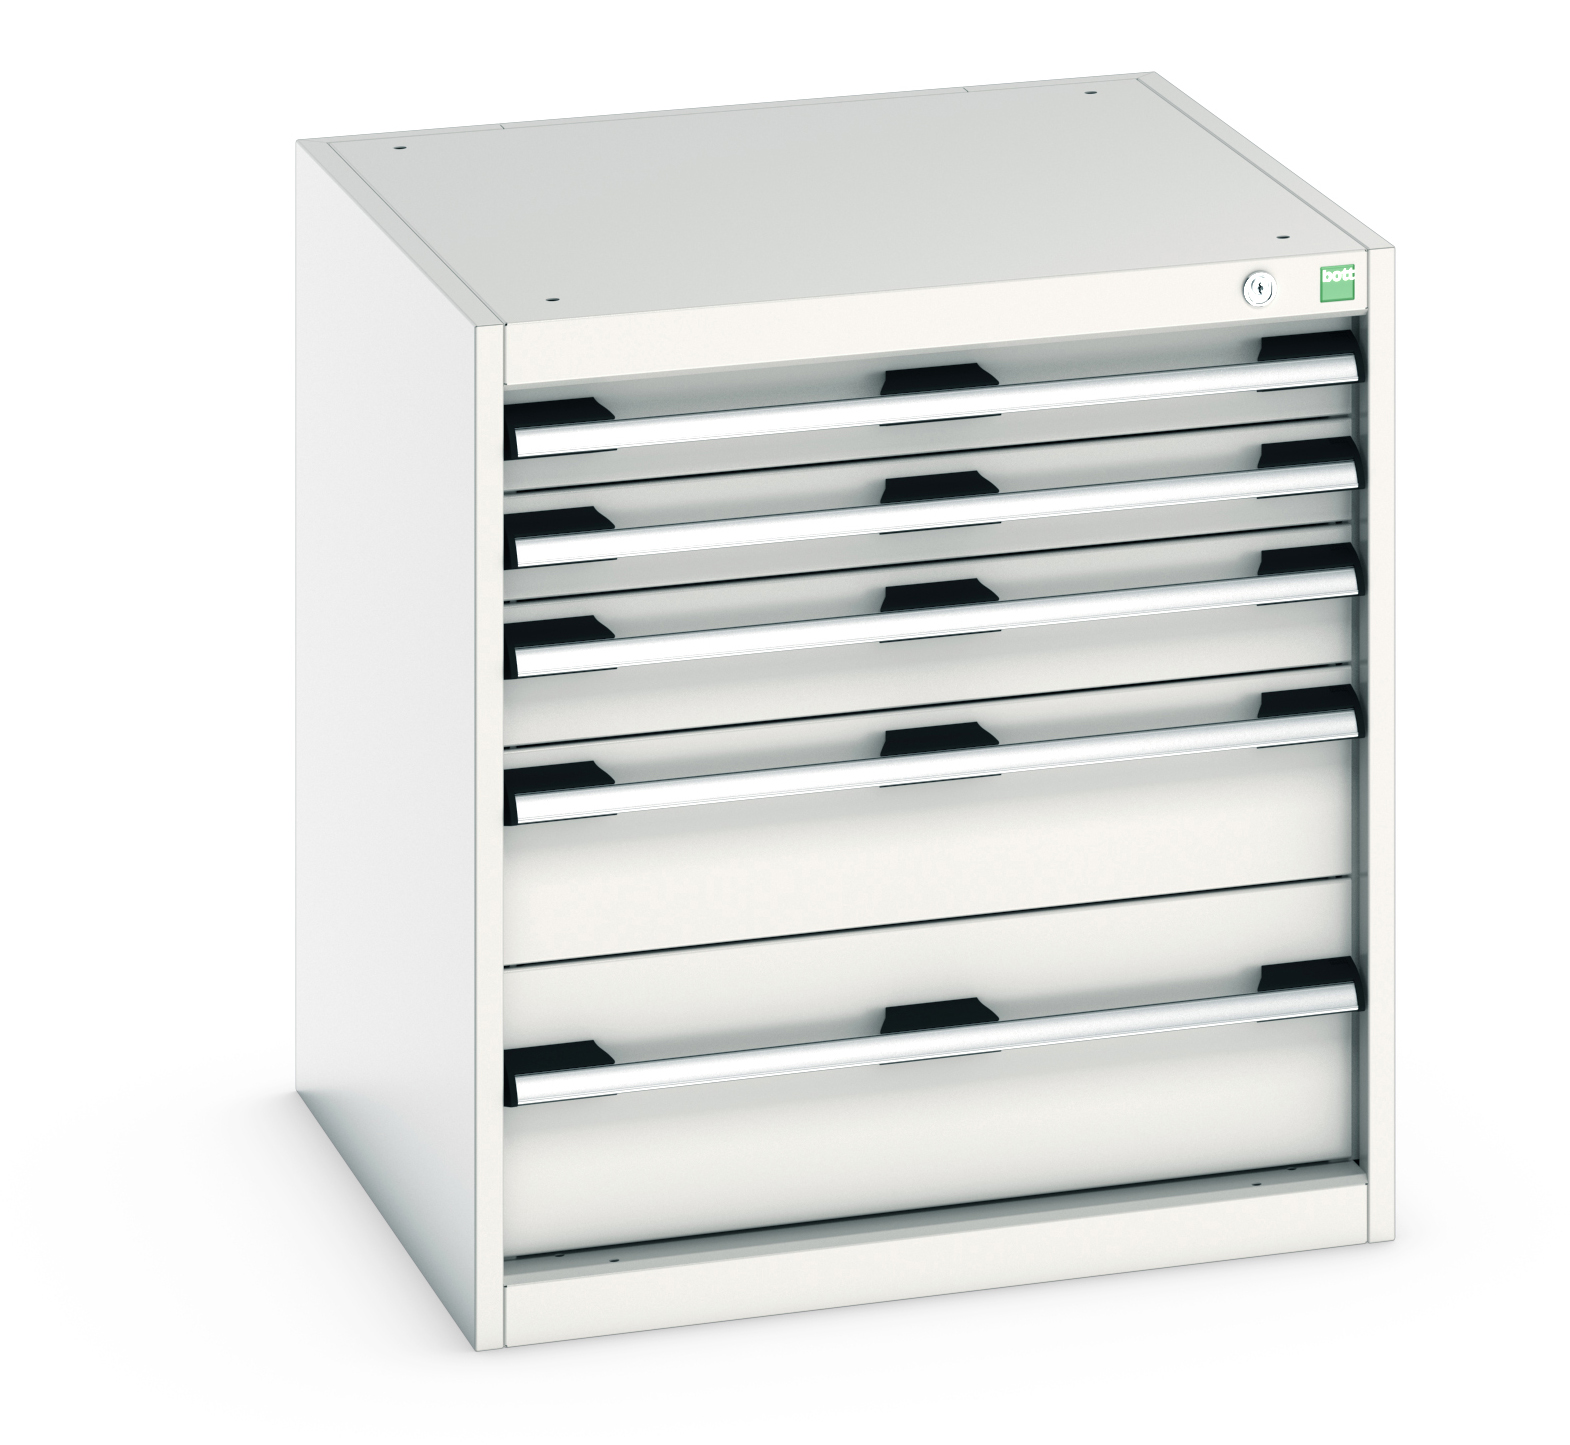 Bott Cubio Drawer Cabinet With 5 Drawers - 40019027.16V